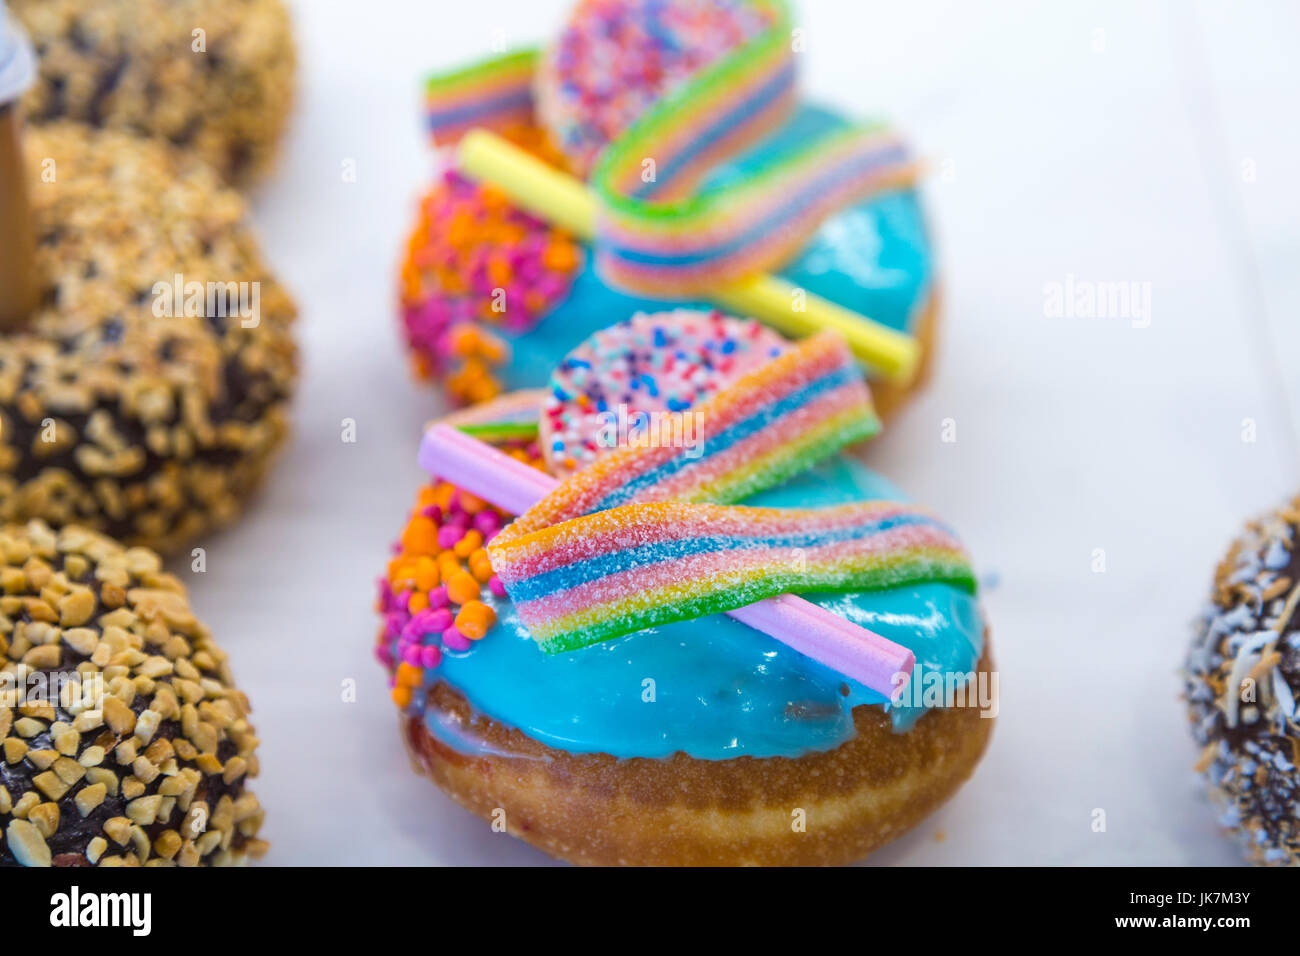 Colourful doughnut with candy, glazing and sprinkles on top (Balls and Bangles, Queenstown, New Zealand) Stock Photo